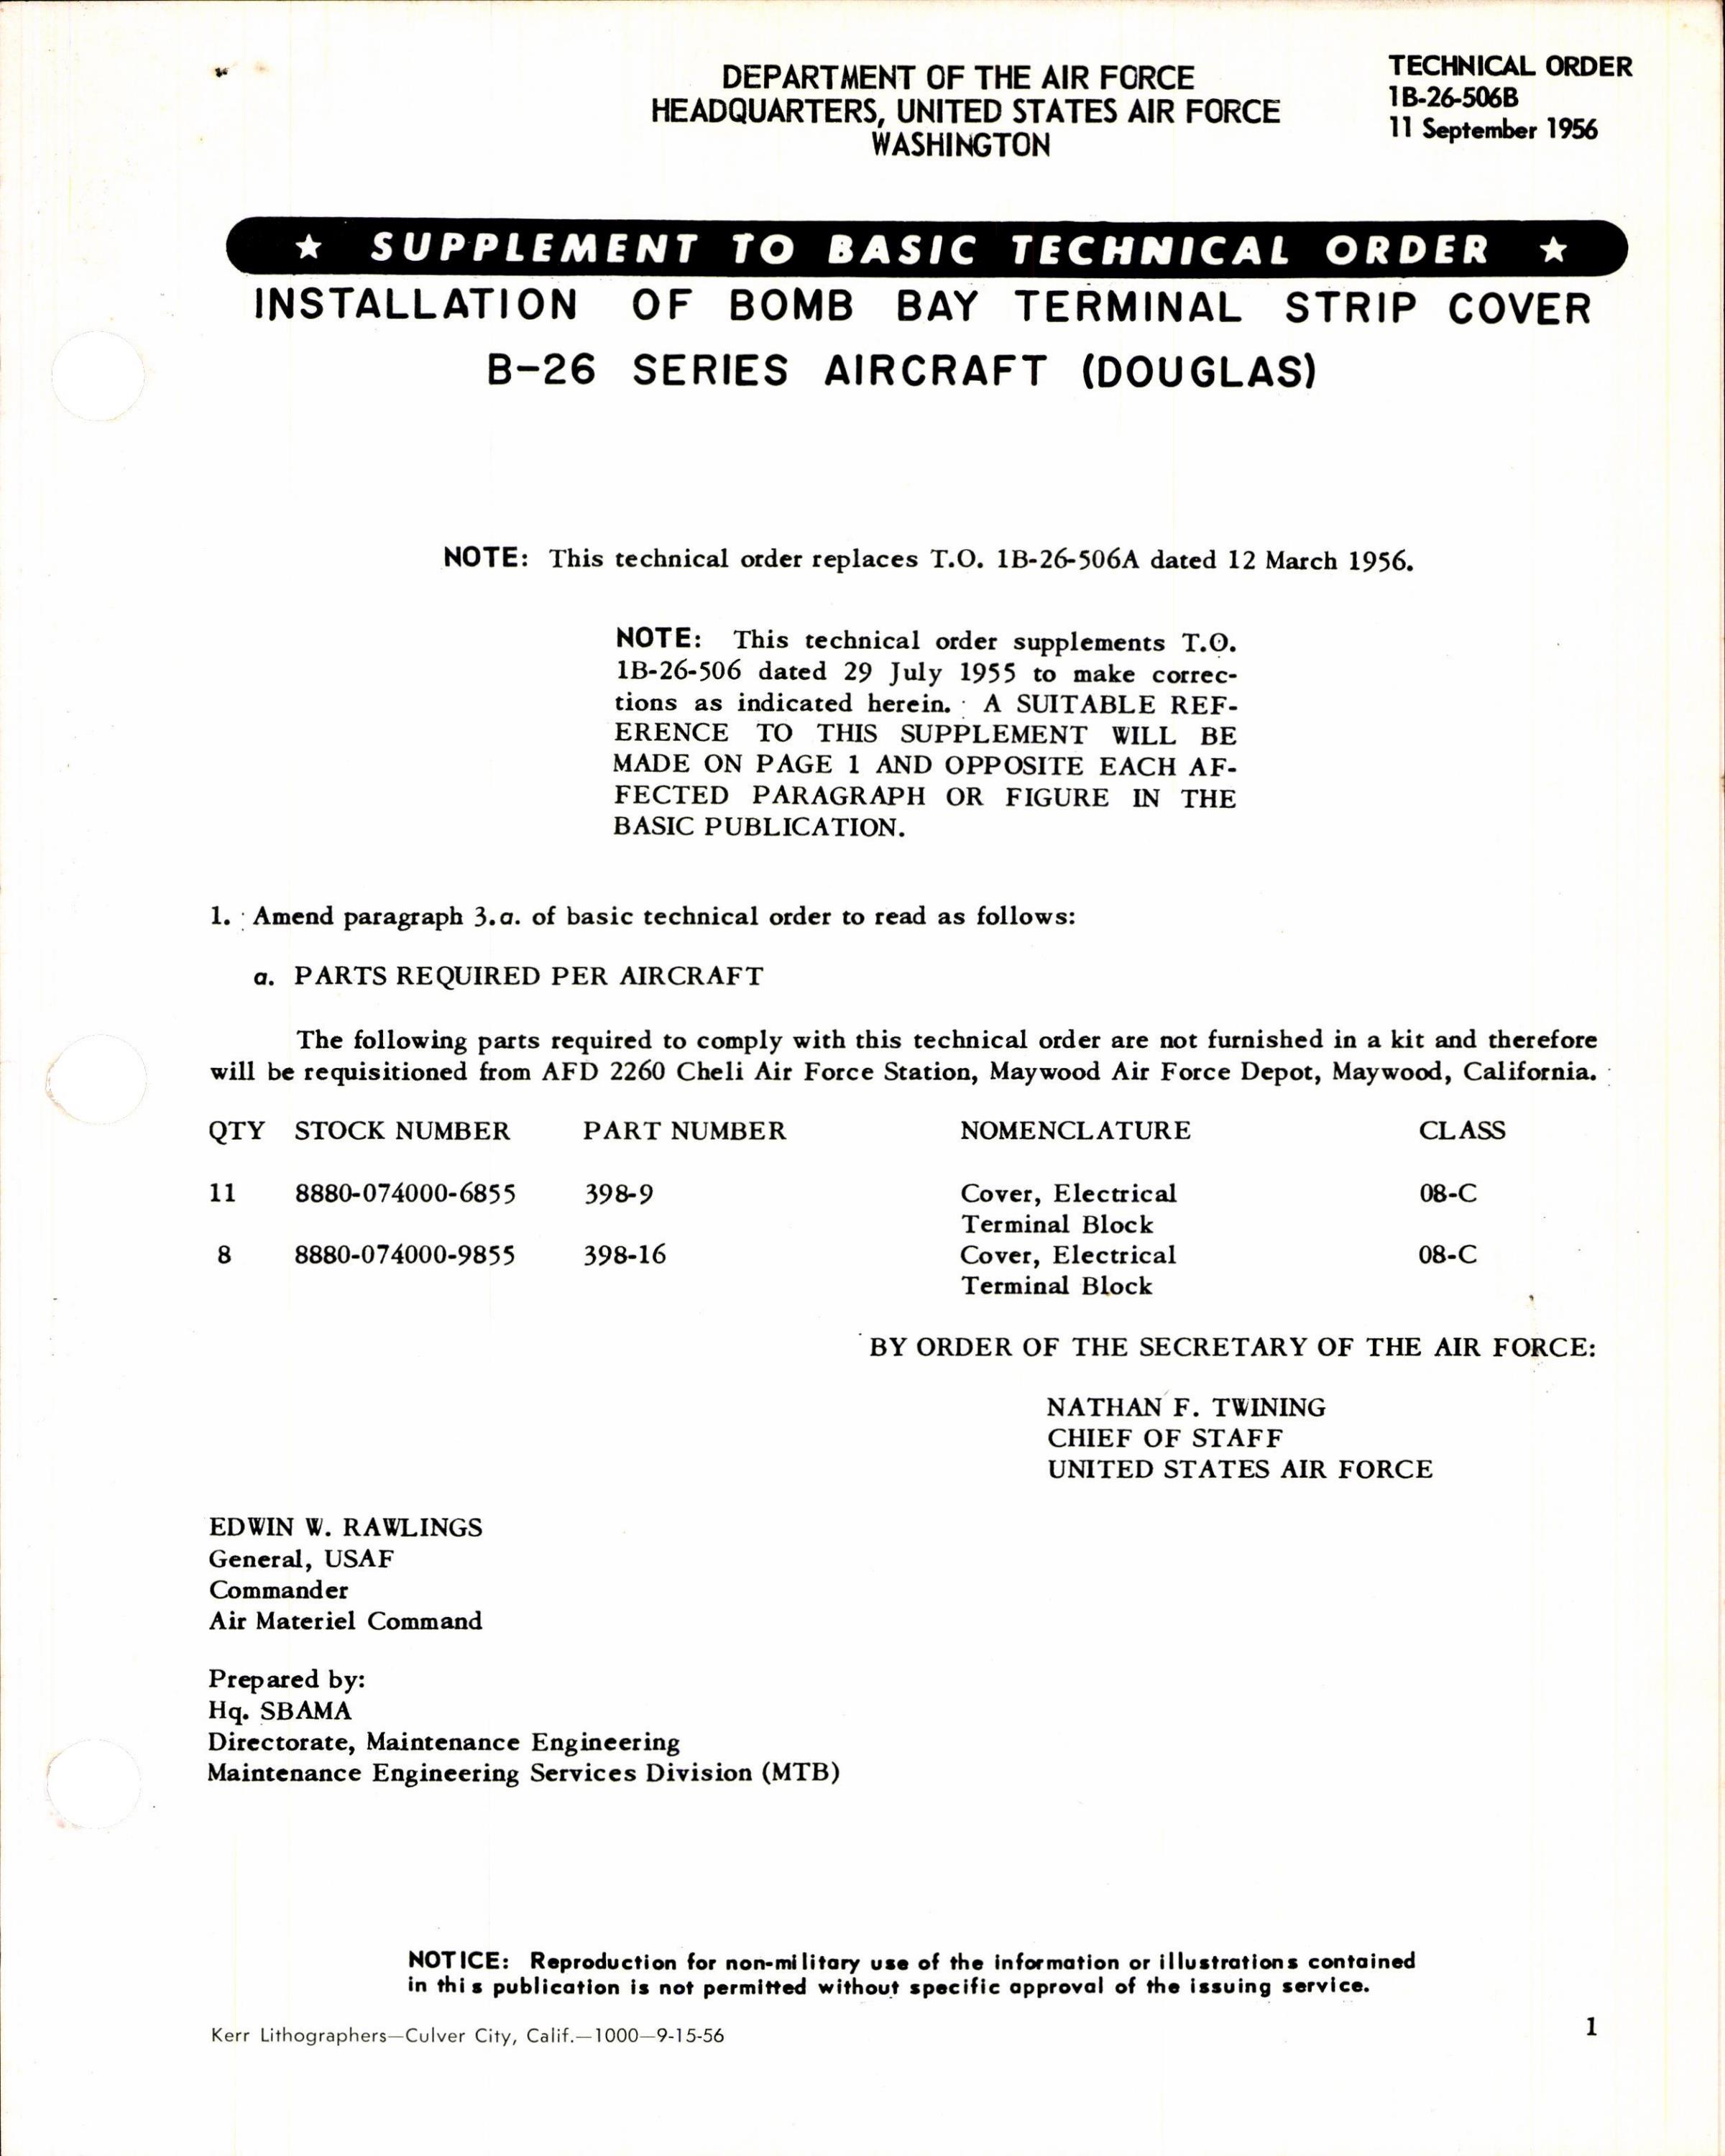 Sample page 1 from AirCorps Library document: Installation of Bomb Bay Terminal Strip Cover B-26 Series